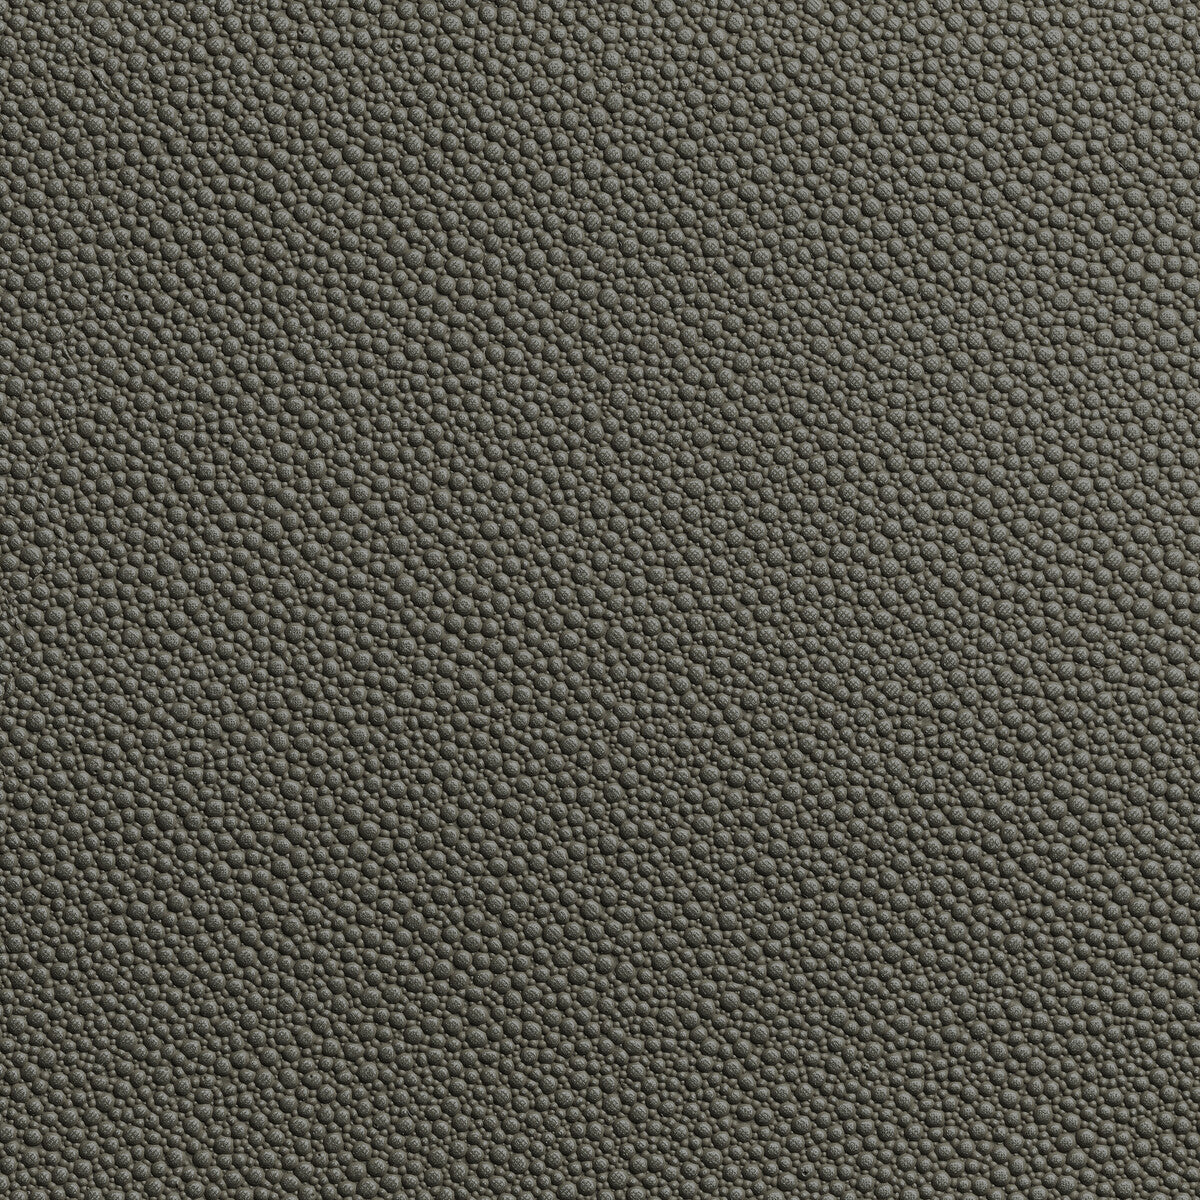 Fetch fabric in granite color - pattern FETCH.21.0 - by Kravet Contract in the Foundations / Value collection